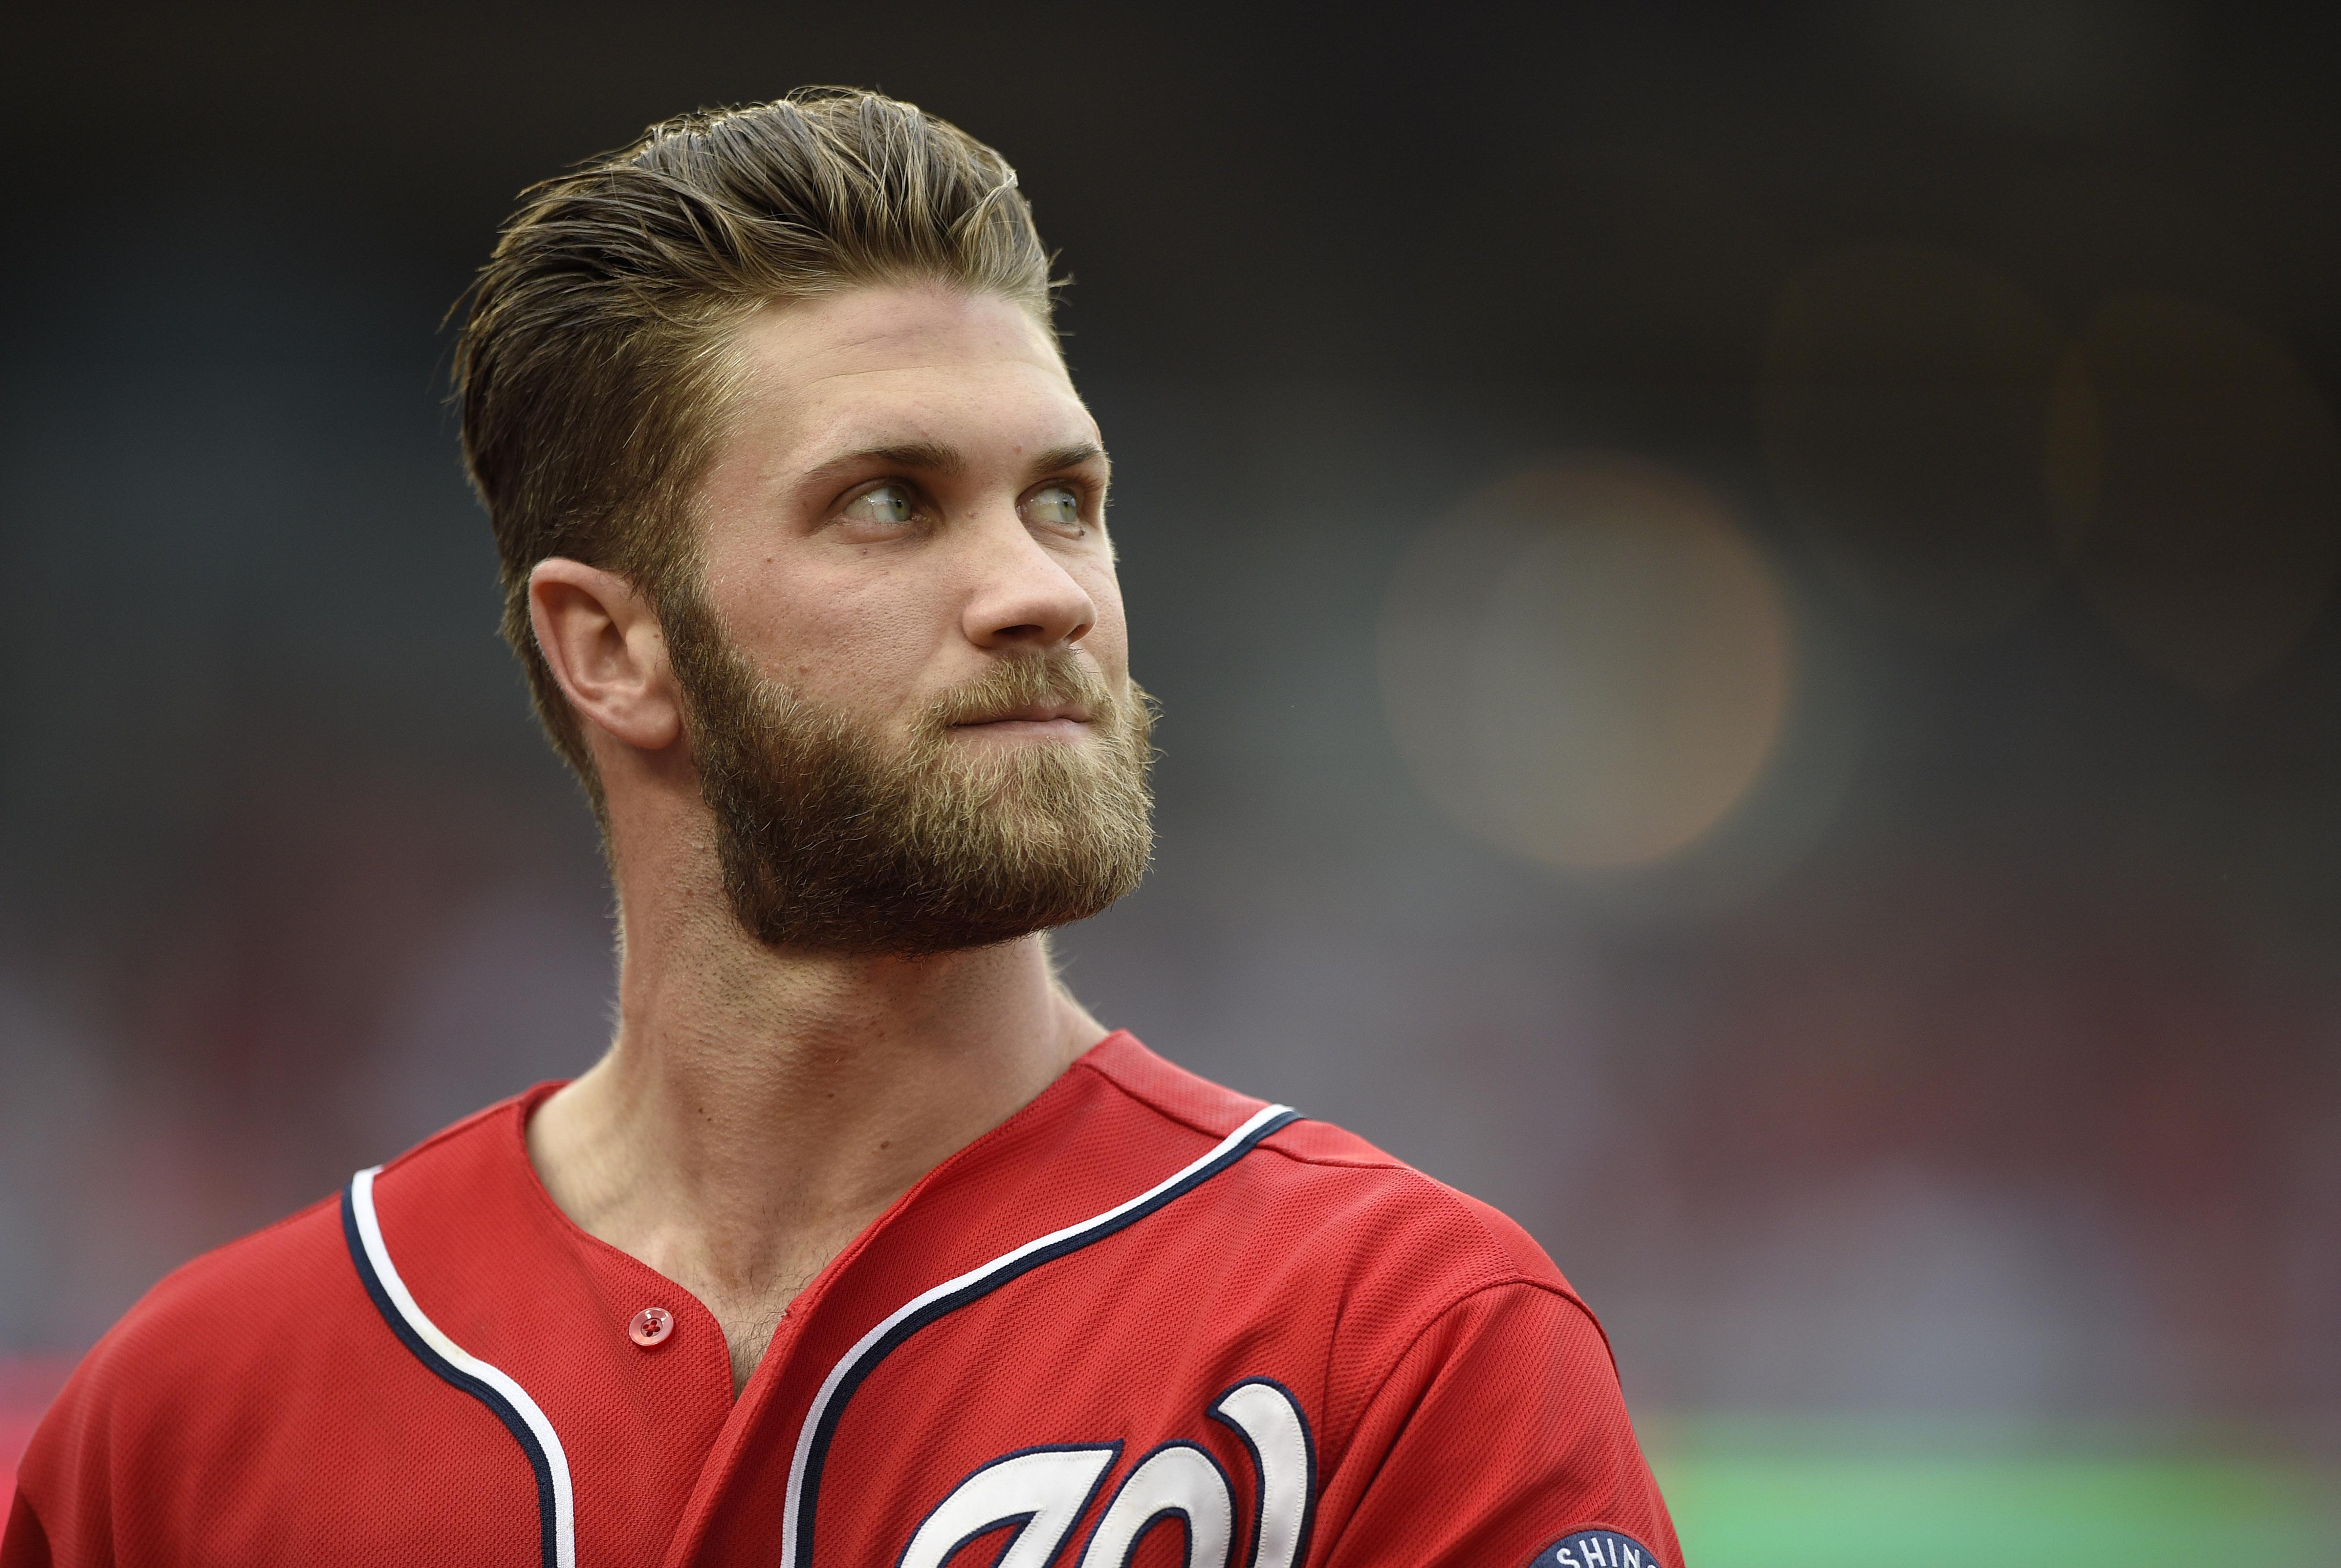 SNYDER: Confidence, not cockiness, has lifted Bryce Harper to new